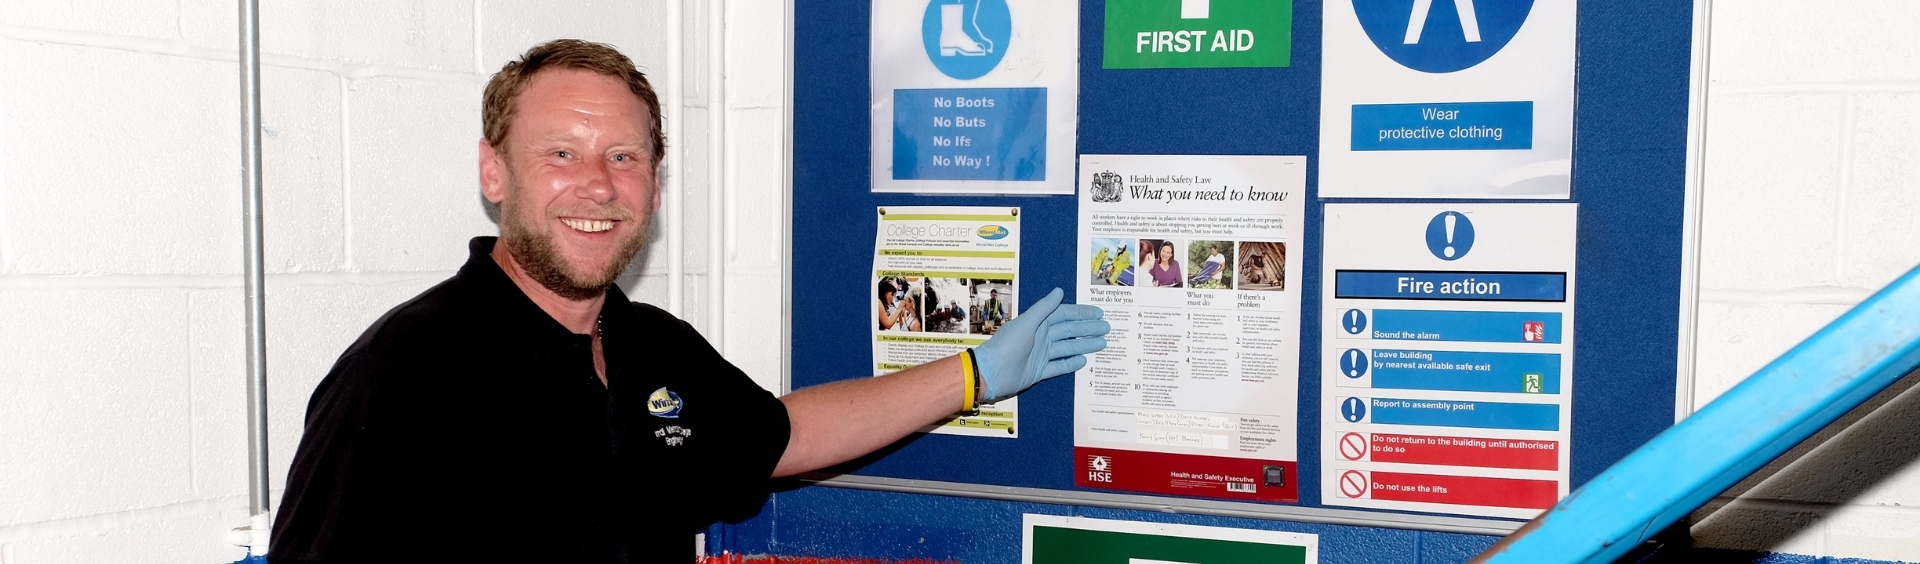 WMC Risk Assessment student pointing at Health & Safety noticeboard in classroom